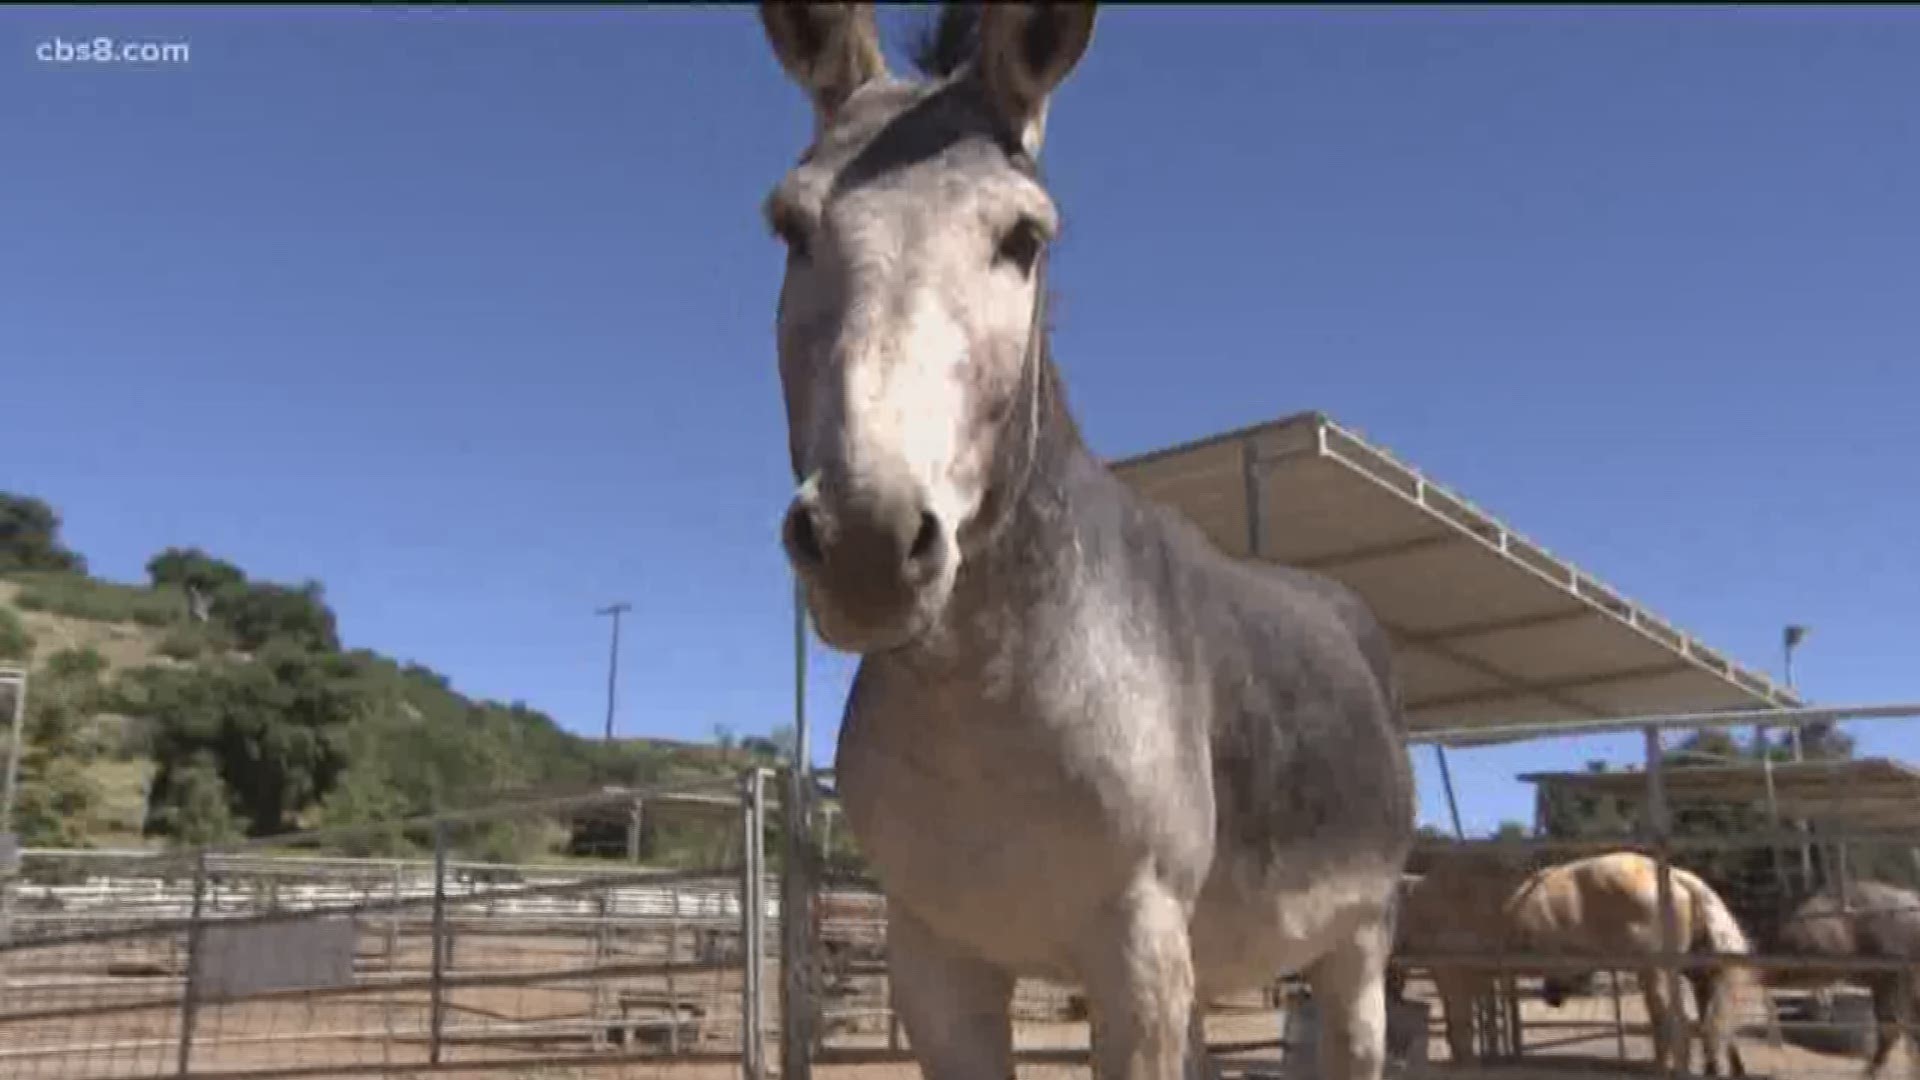 If you love the outdoors, animals and helping the community, the county's longest operating non-profit equine sanctuary is in need of volunteers and donations. In Wednesday's Zevely Zone, Jeff visited the Horses of Tir Na Nog in Guatay to roll up his sleeves.